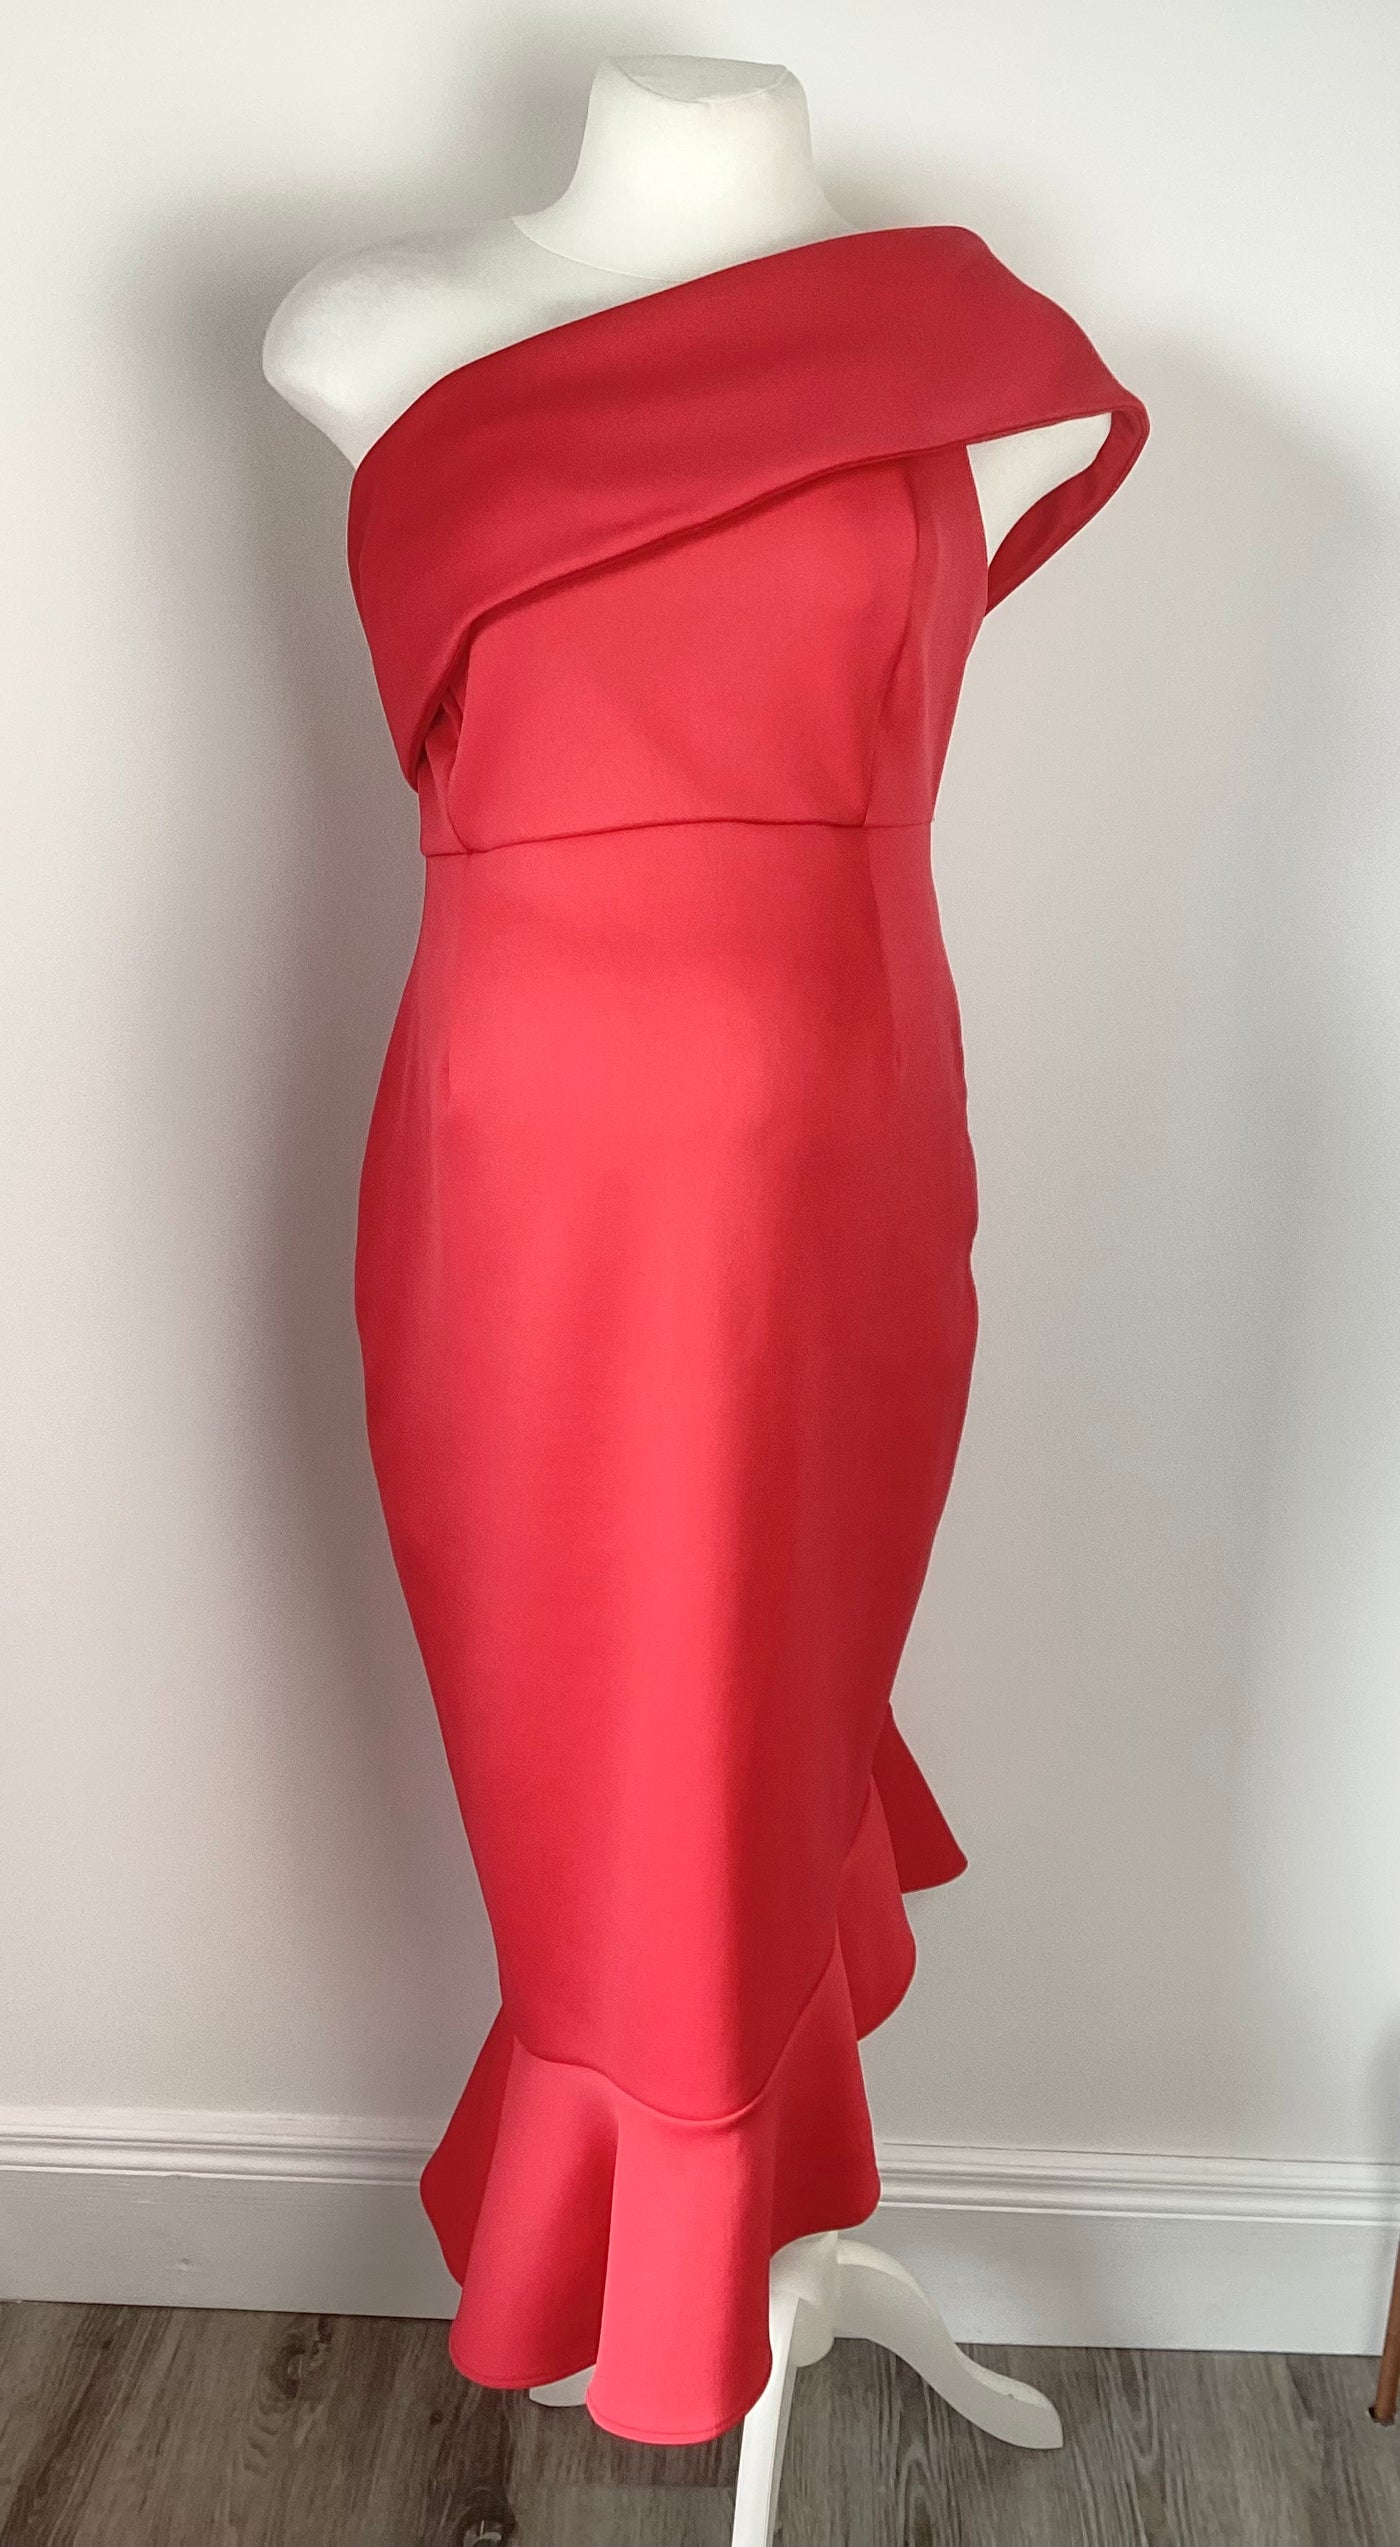 Red one shoulder midi dress with frill bottom (no label) - Size 16